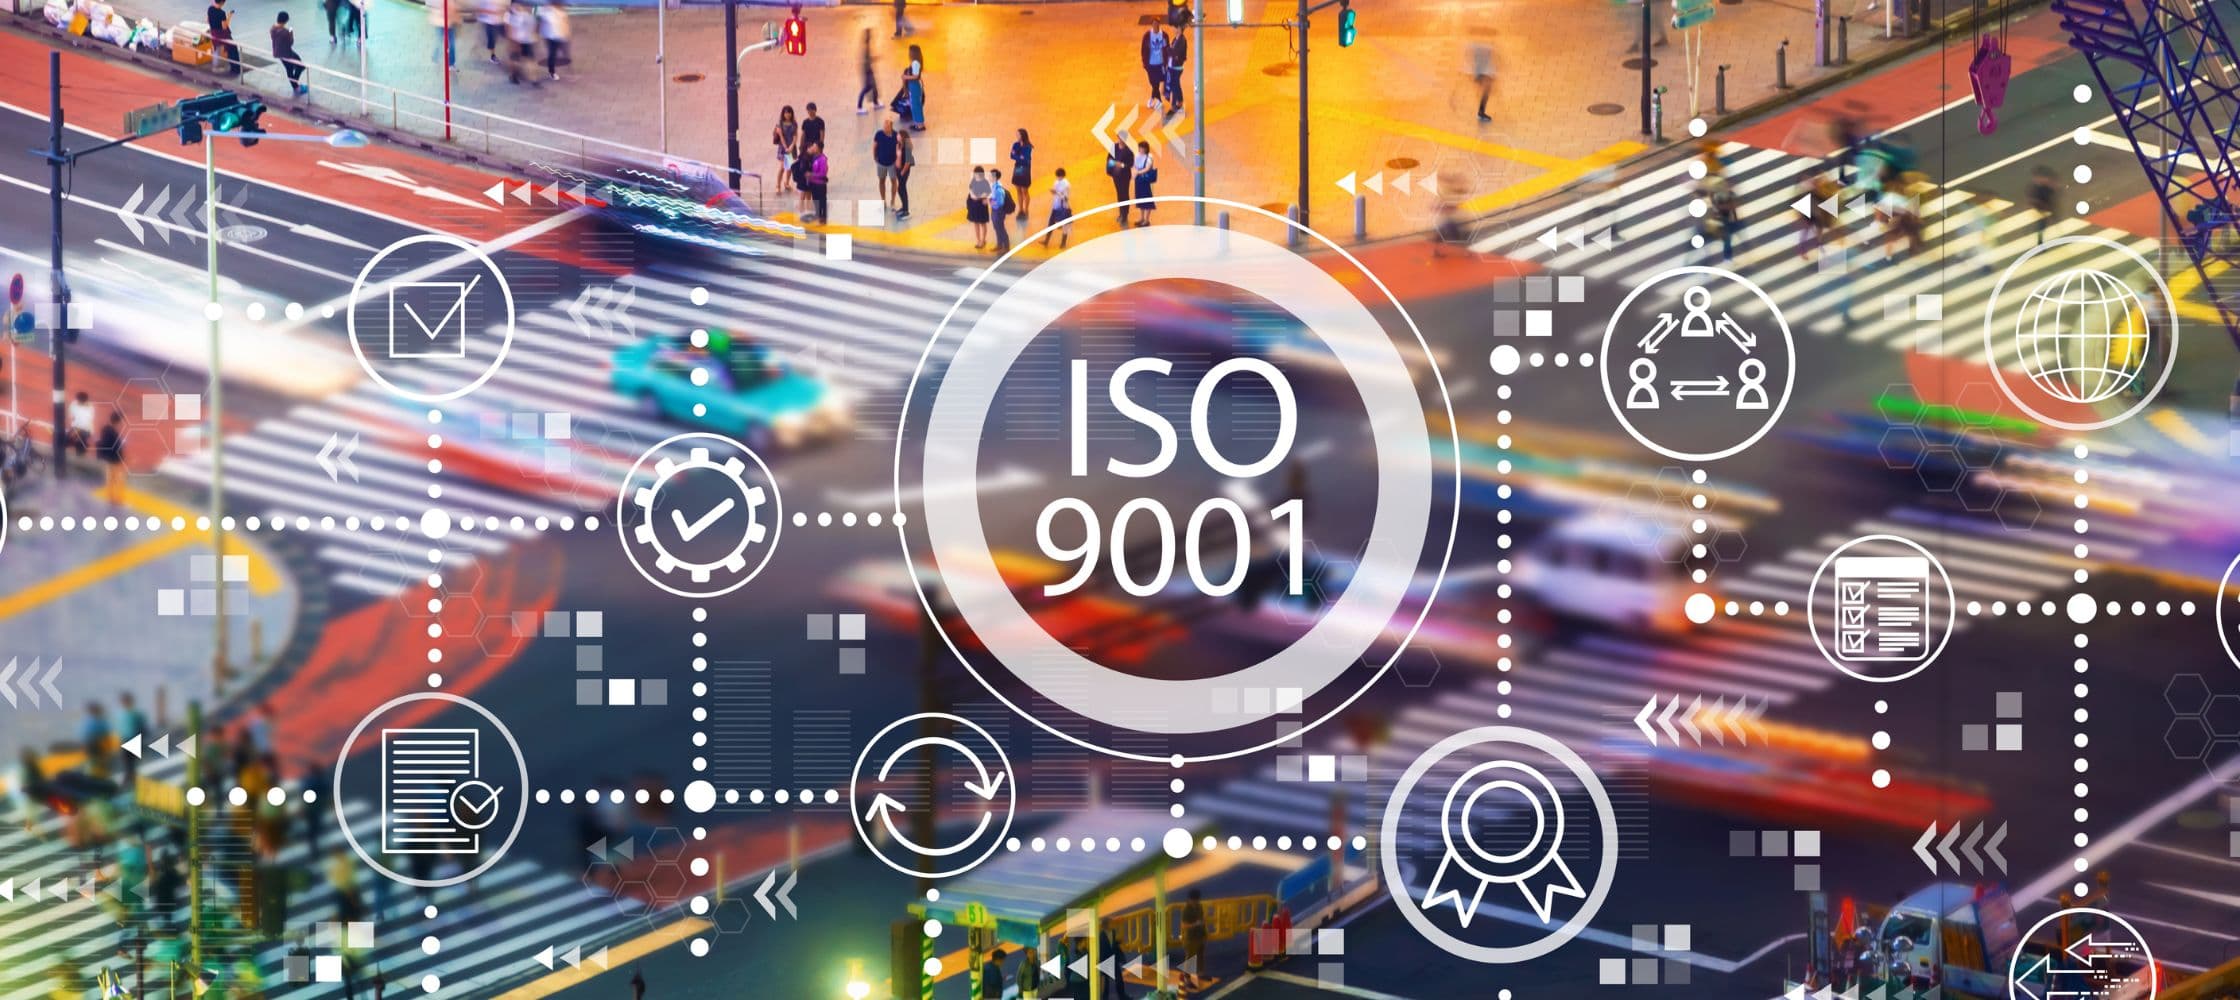 Formation ISO 9001 à Nantes